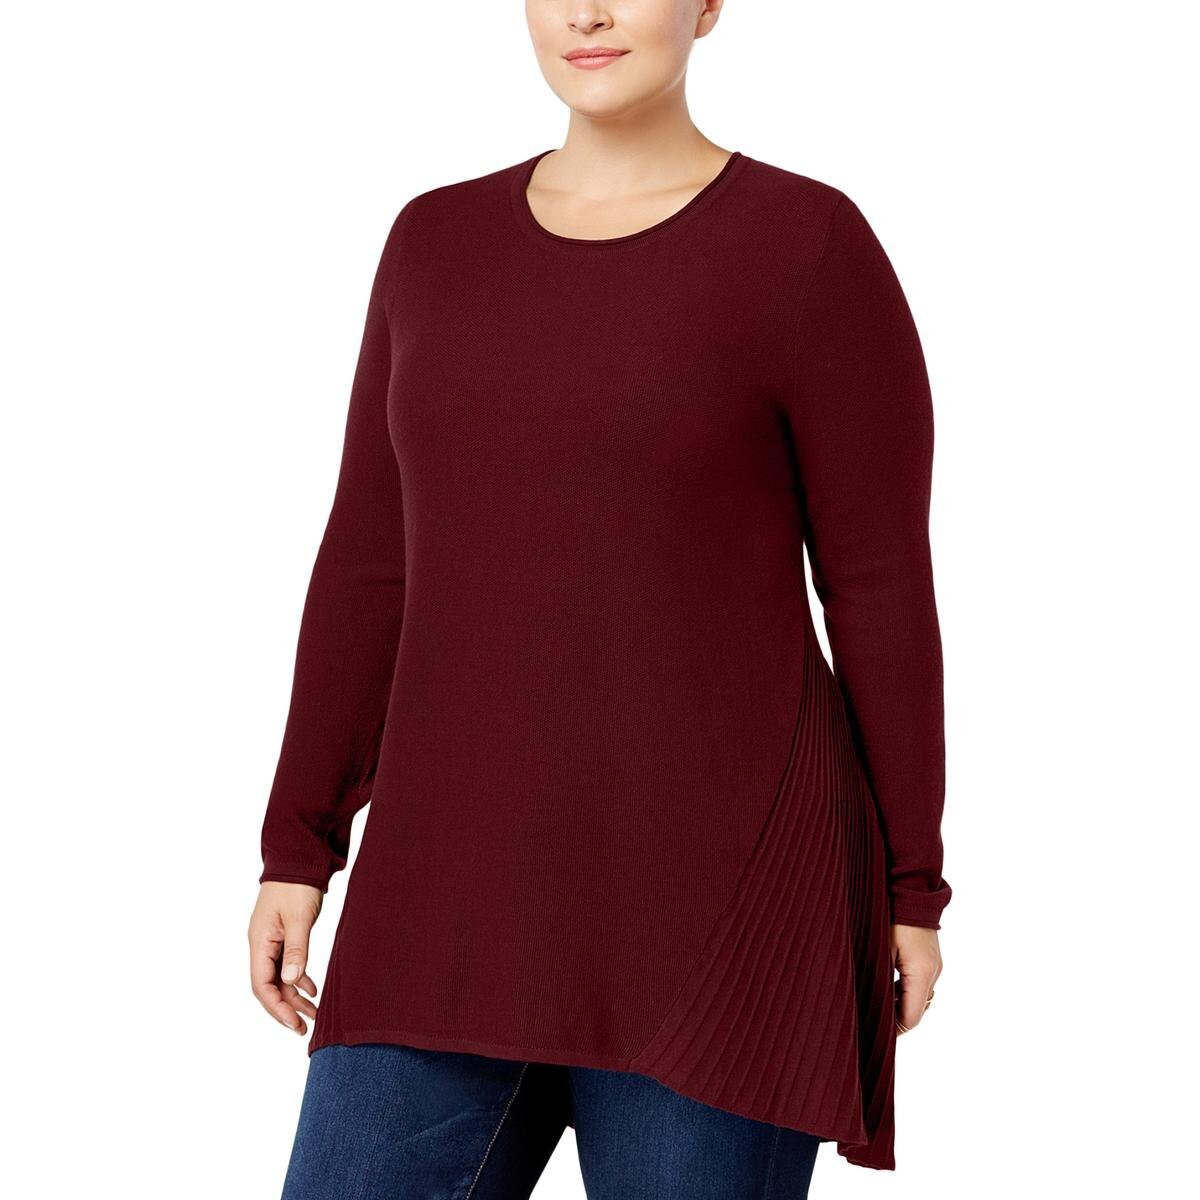 STYLE & CO $56 Plus-Size Long-Sleeve Scoop-Neck Sweater Tunic Top 1X ...